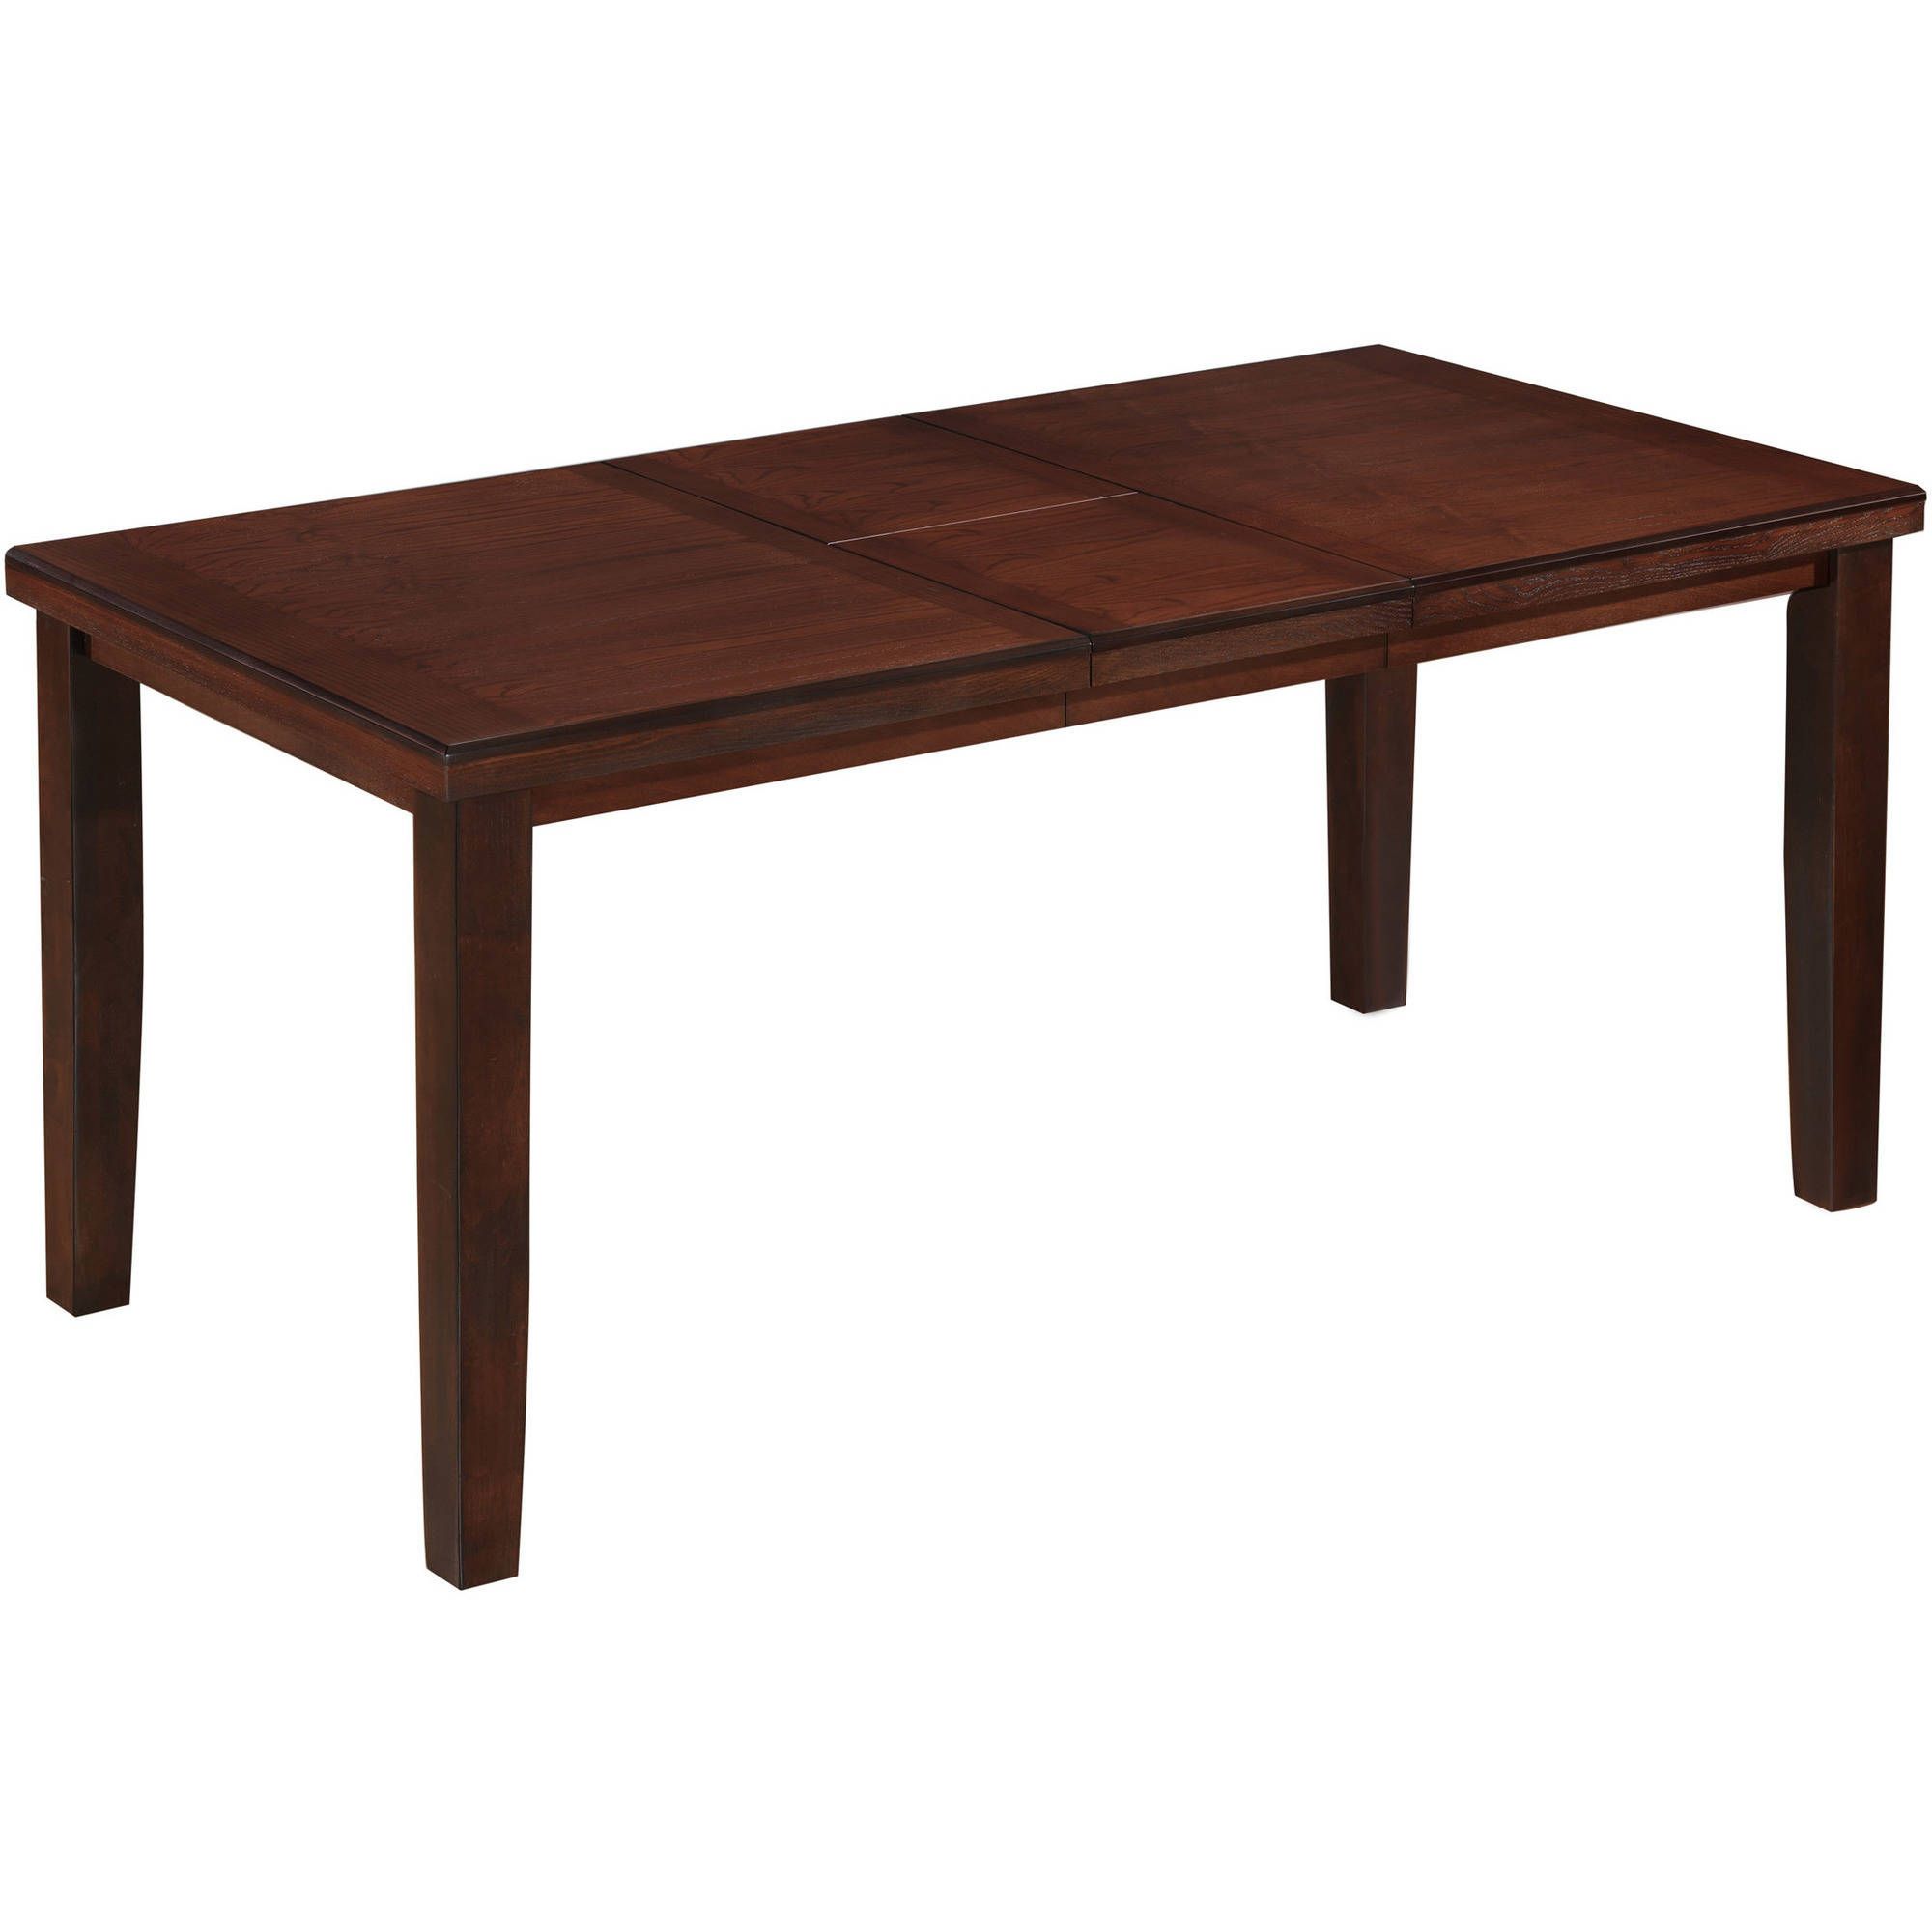 Corliving Warm Brown Counter Height Dining Table With Throughout 2018 Brown Dining Tables With Removable Leaves (View 1 of 15)